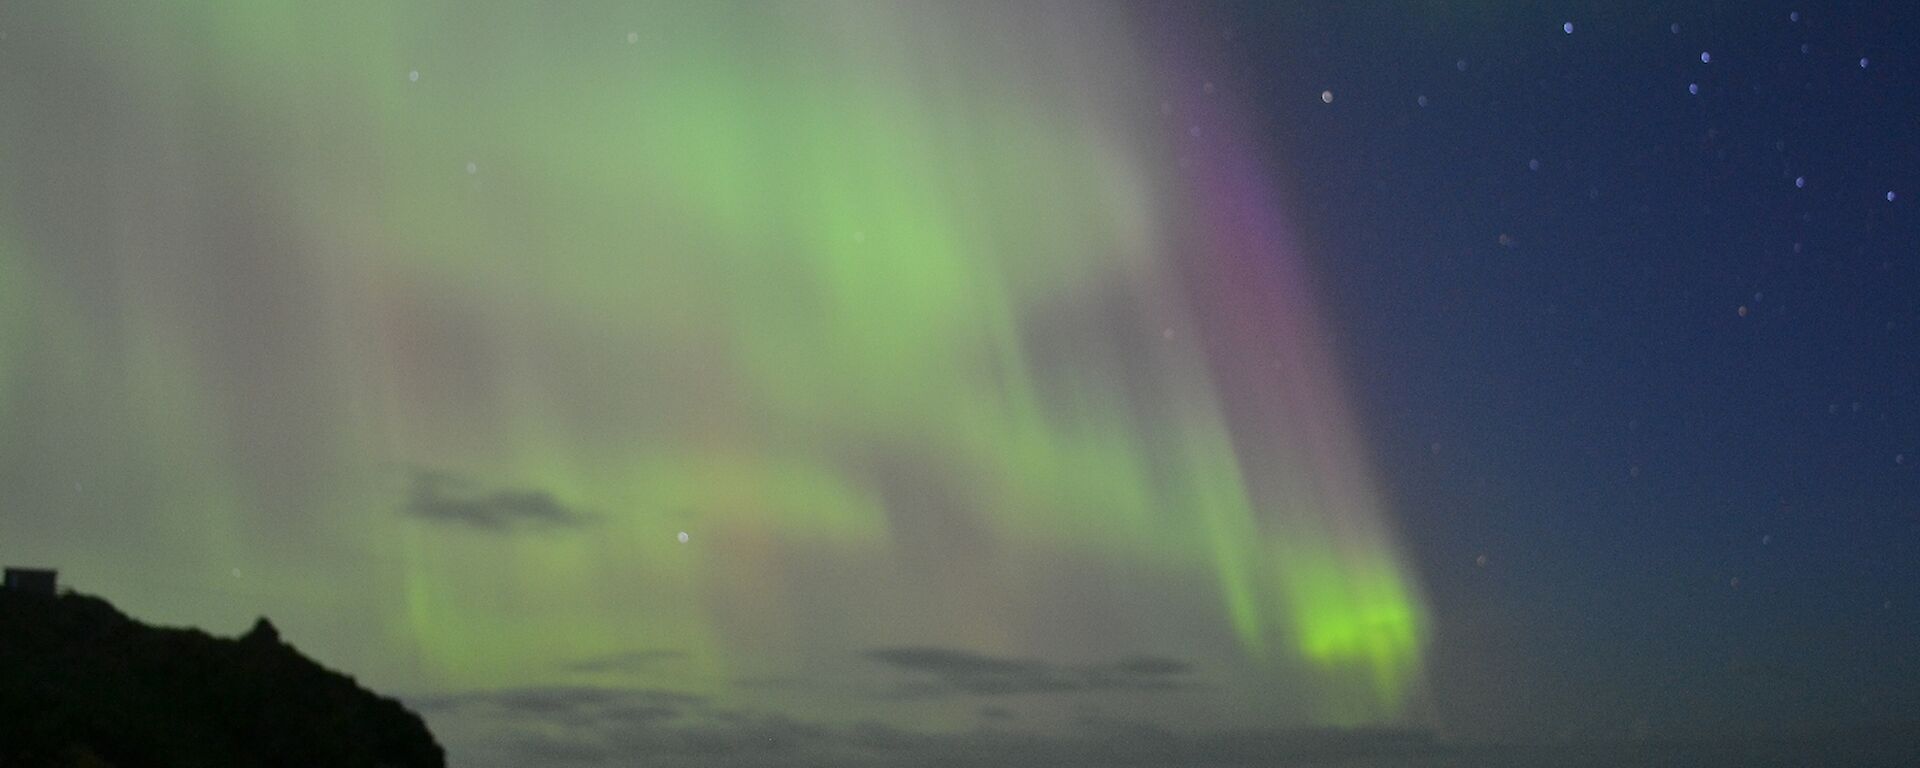 The light of an aurora dances just off shore at Macca